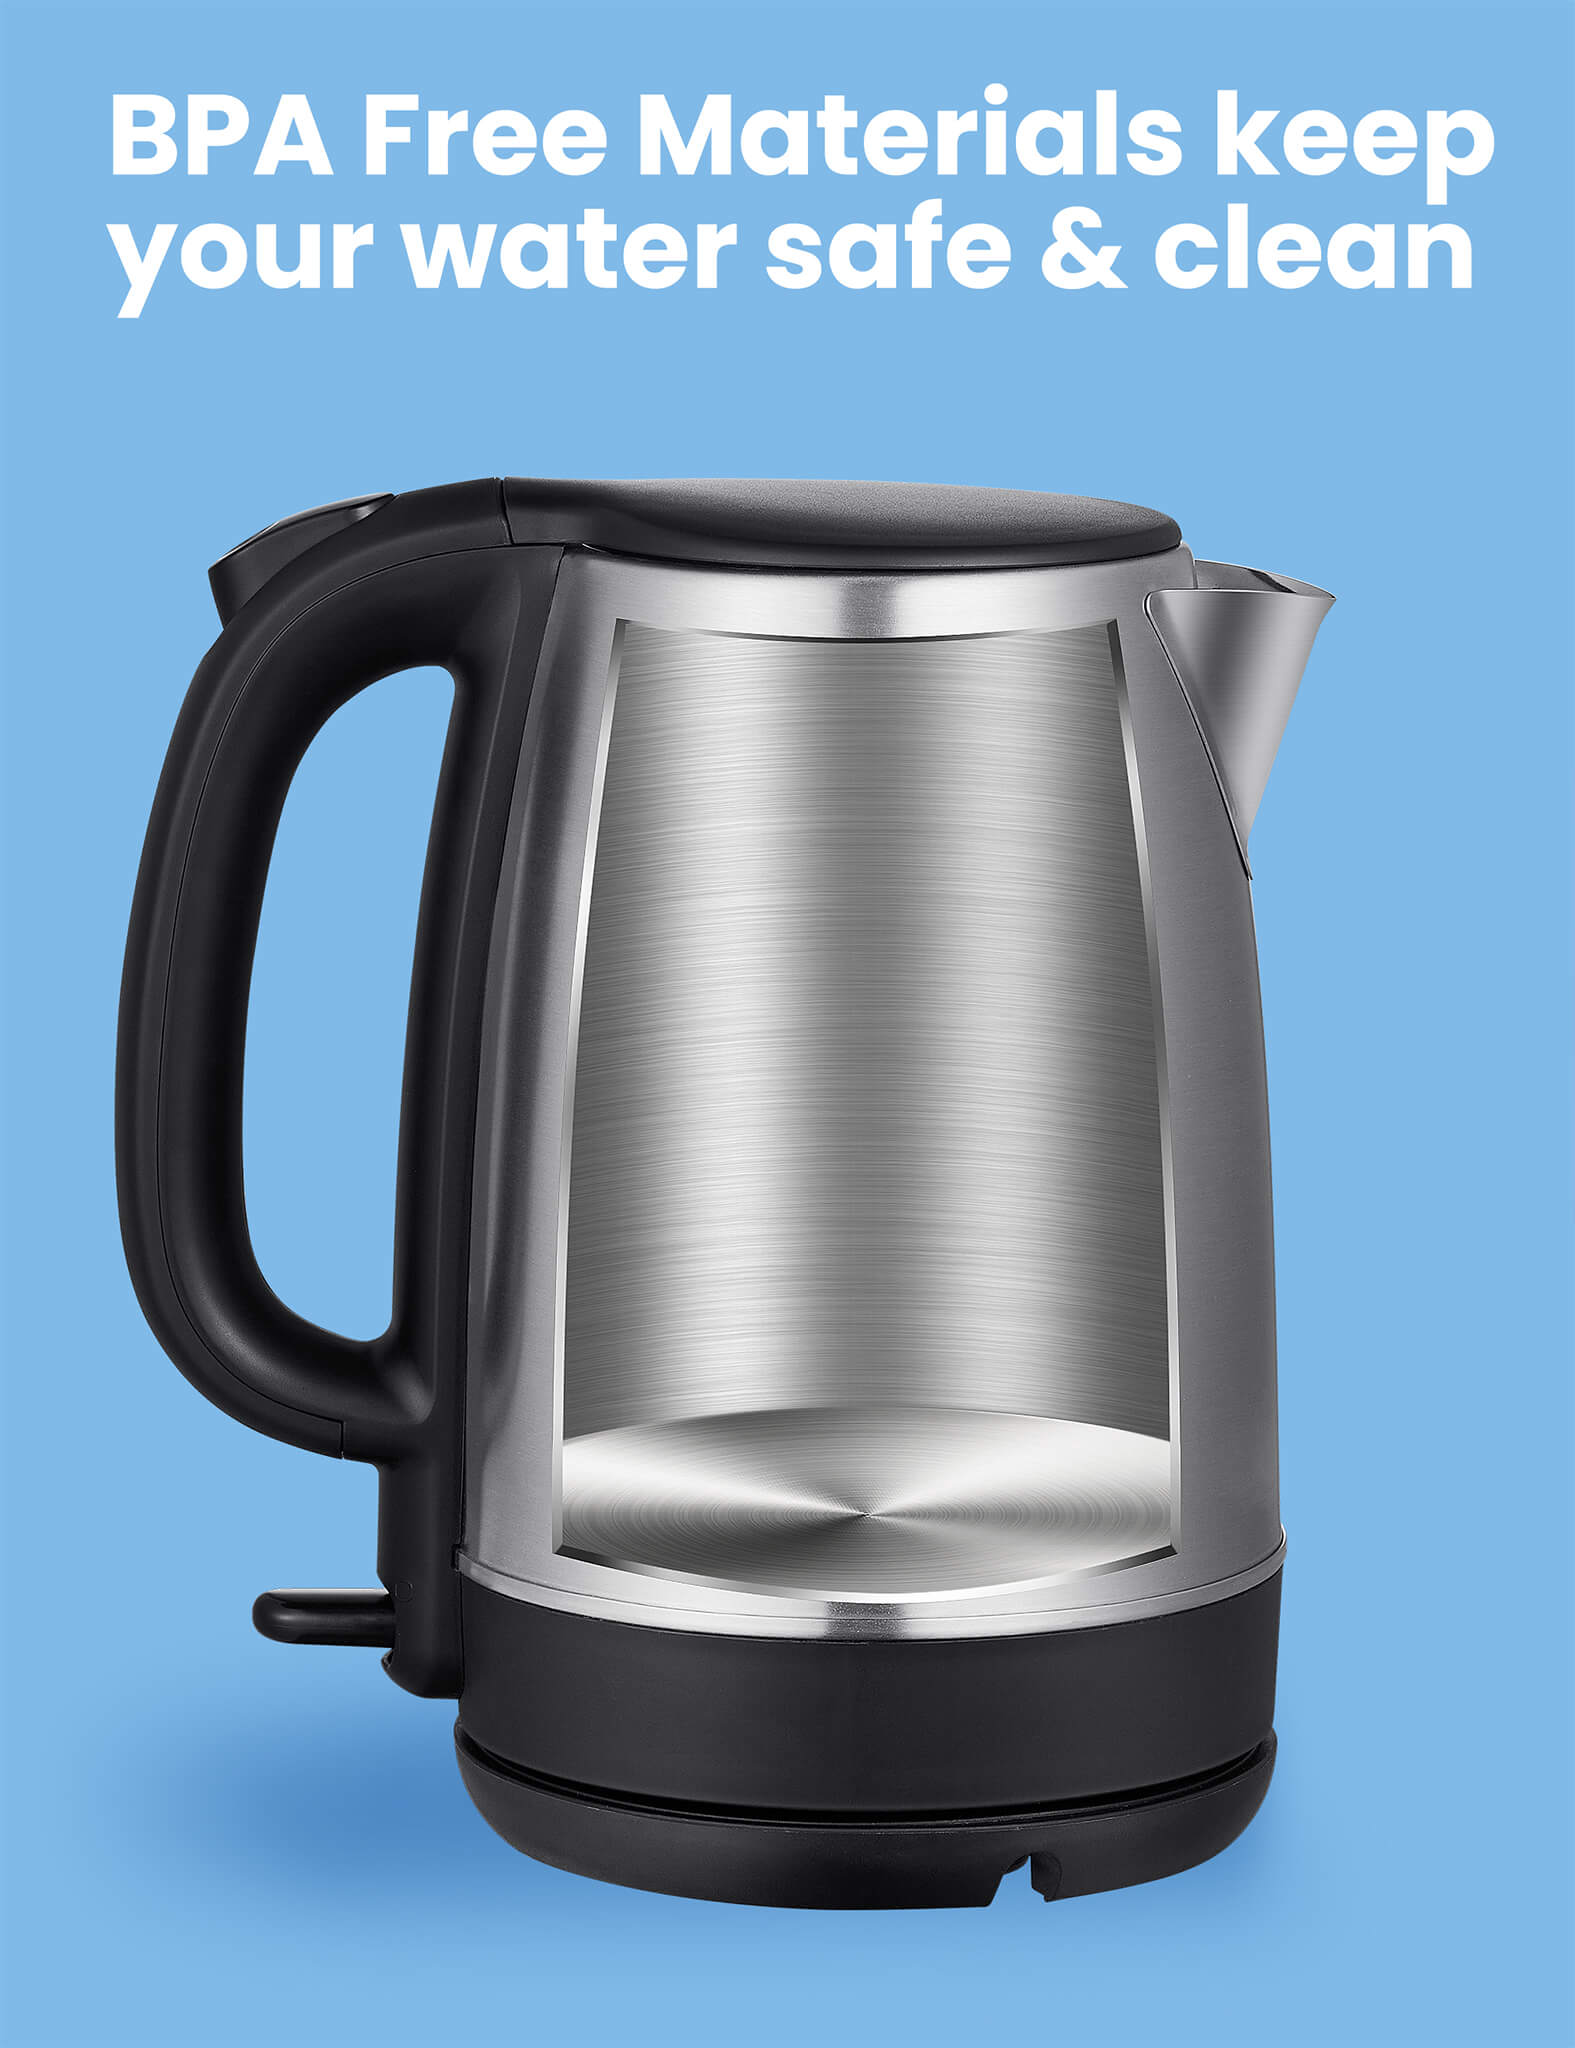 Here are Some Reasons to Break Out Your Electric Kettles! – Comfee